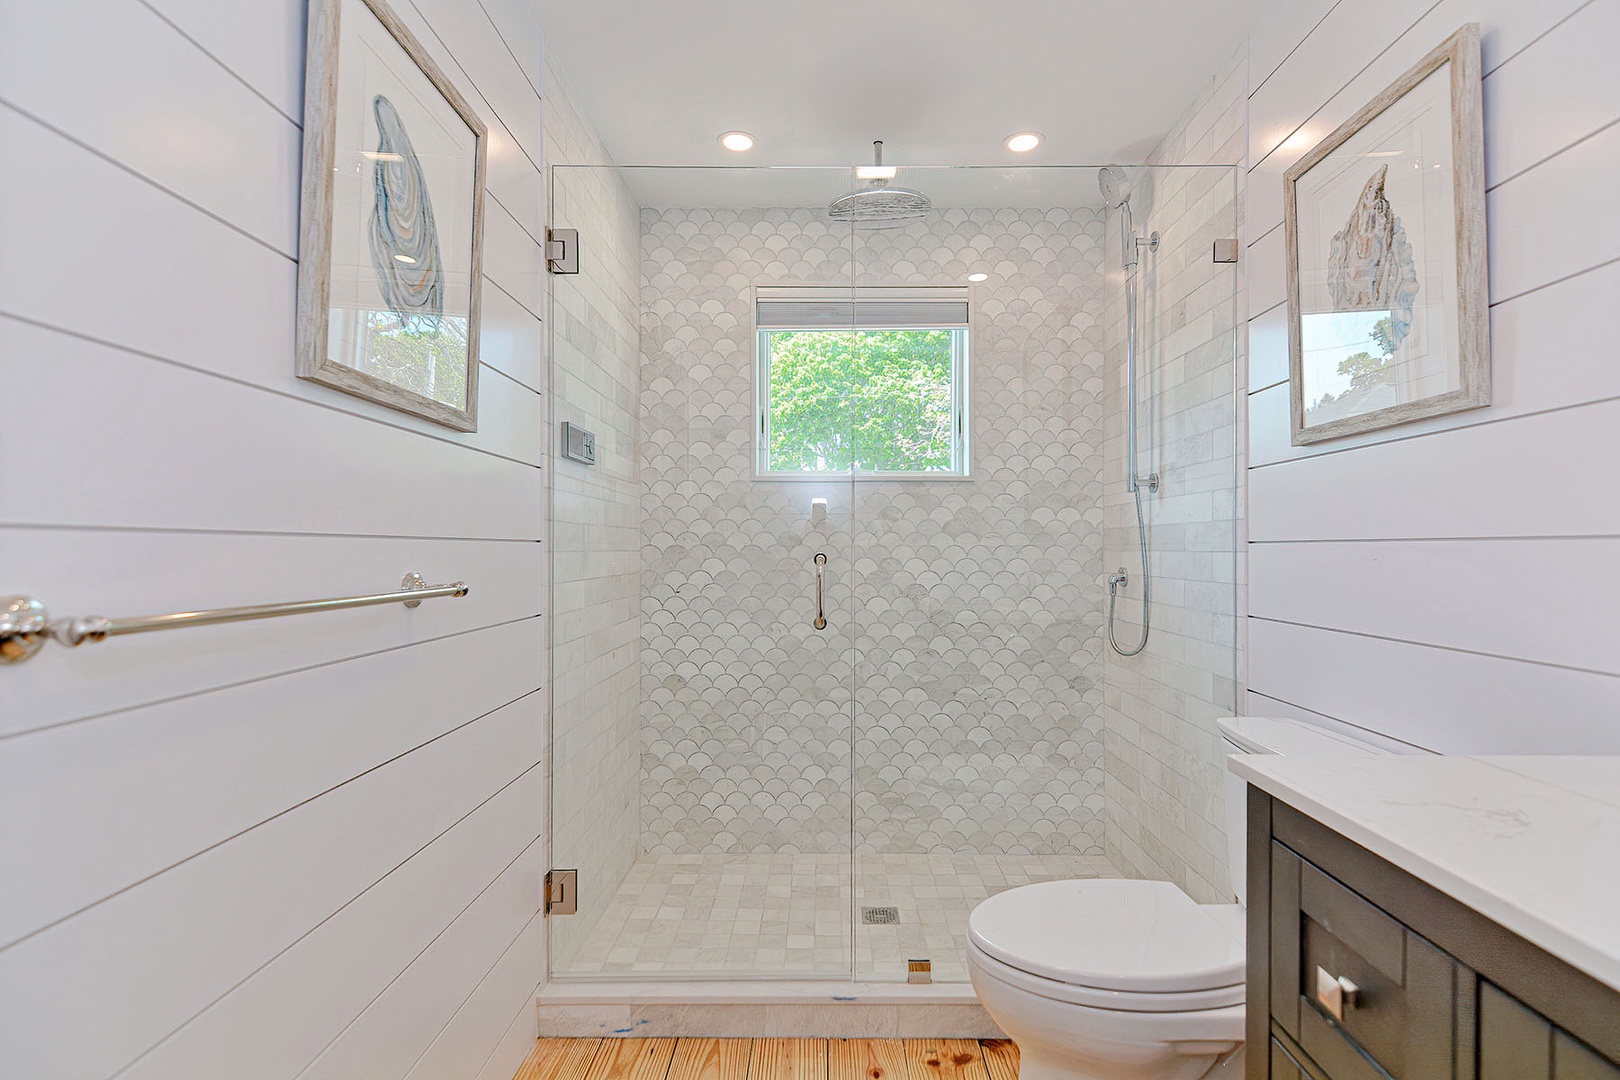 Primary suite bathroom with walk-in shower